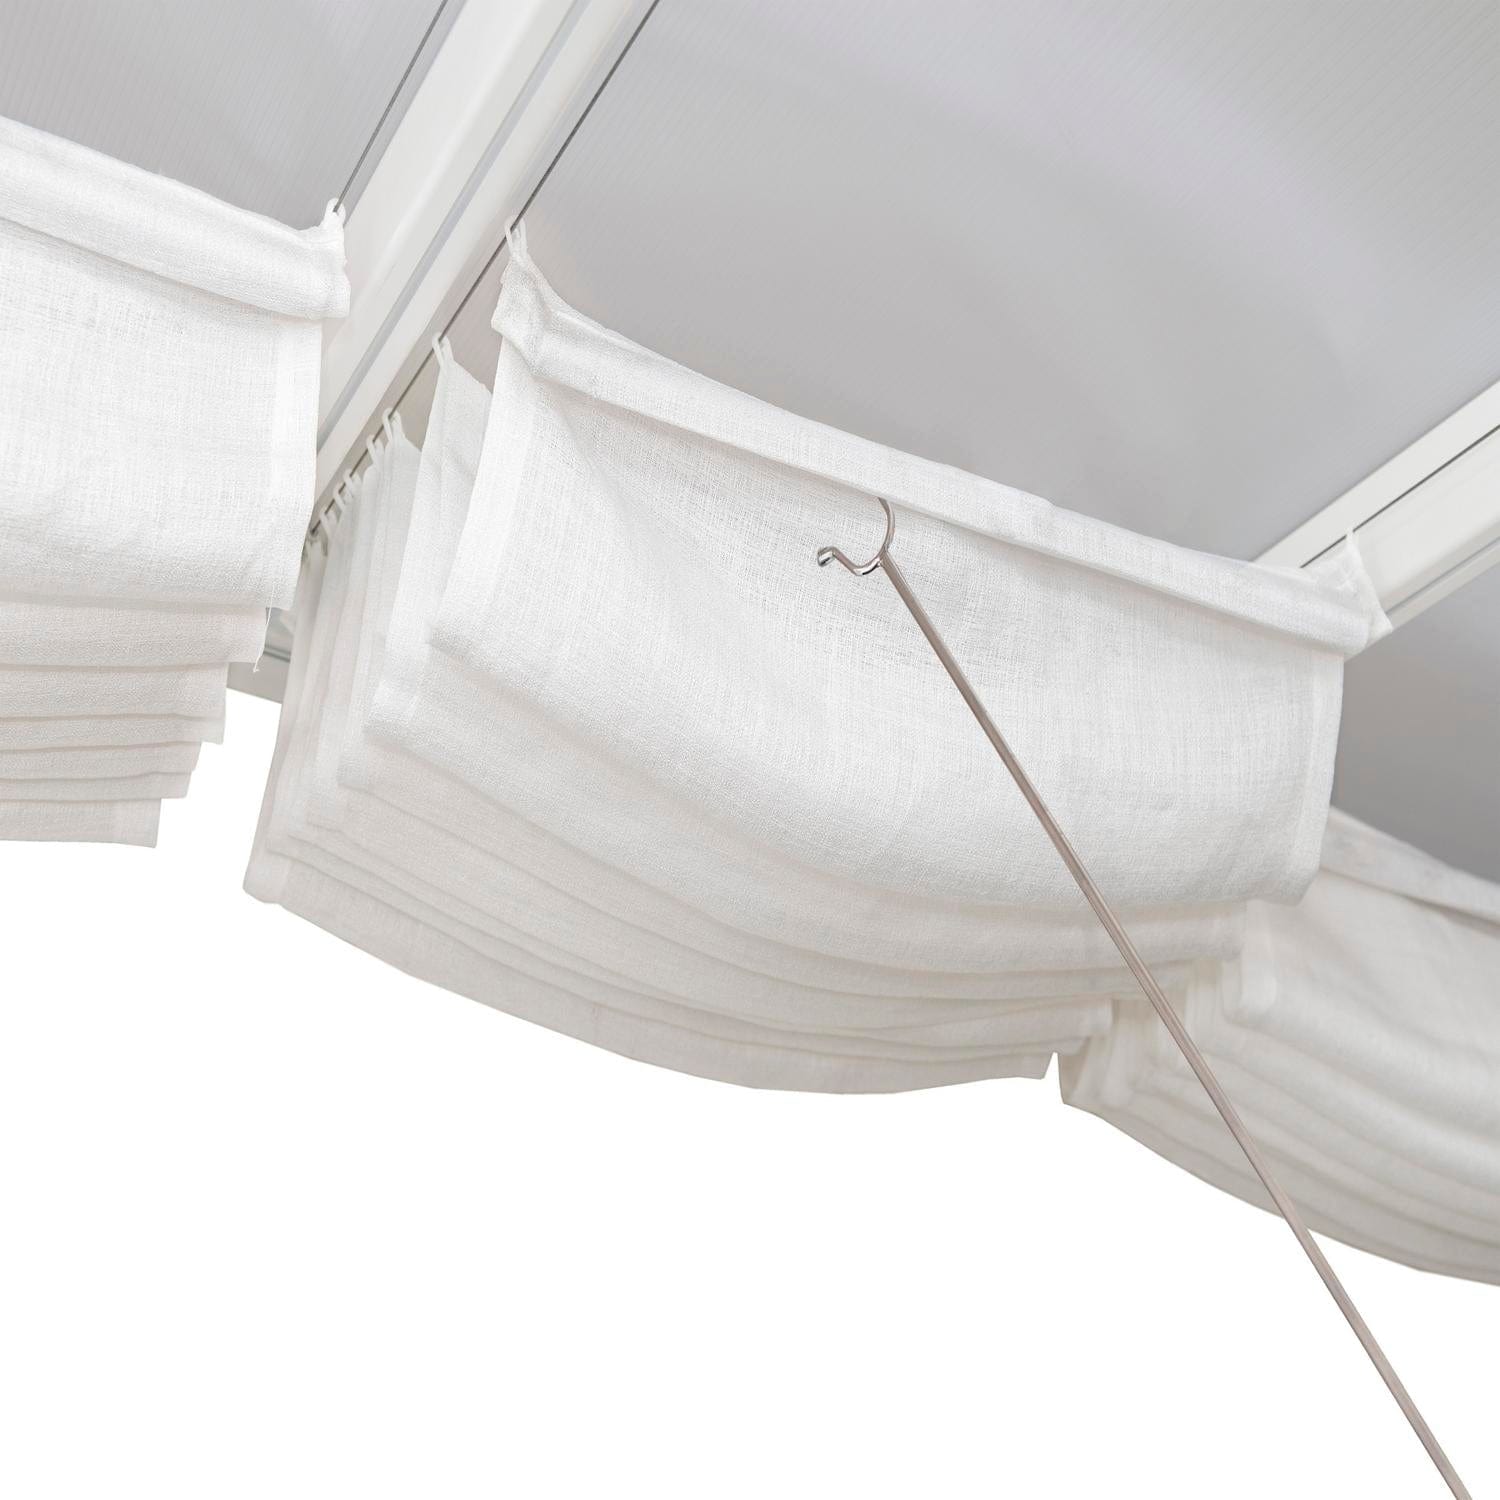 Palram - Canopia Patio Cover Accessories Palram - Canopia | Patio Cover Blinds 10x28 ft - White HG1076